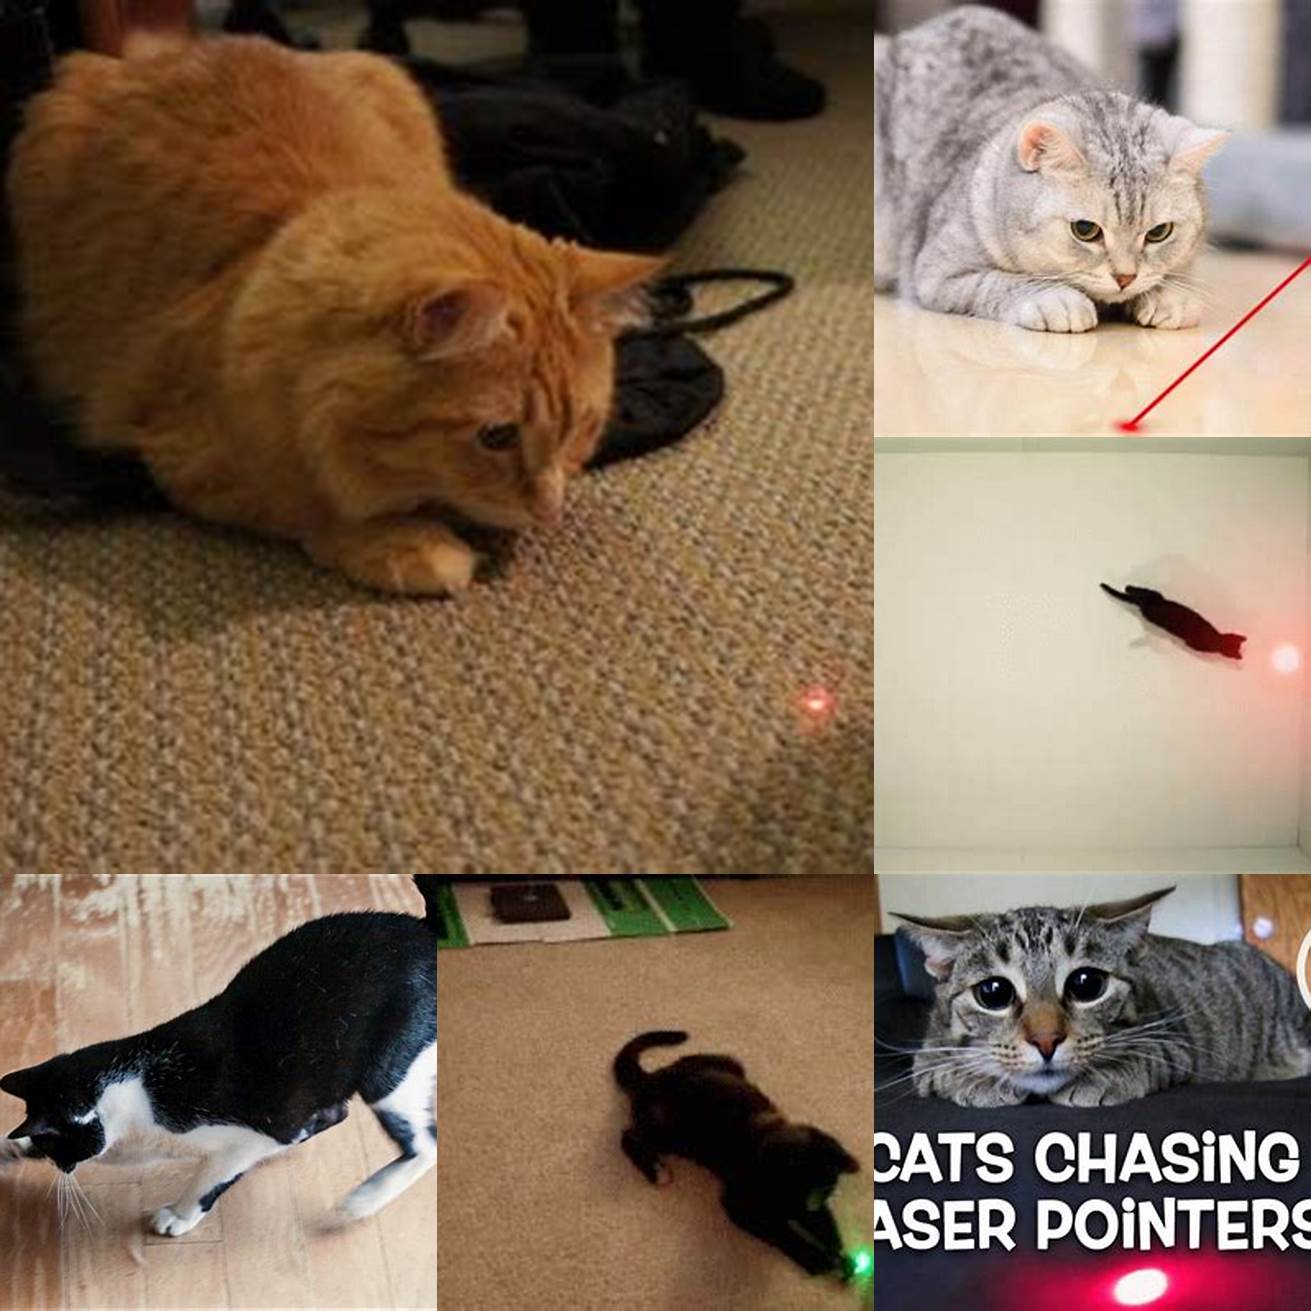 Cat chasing a laser pointer